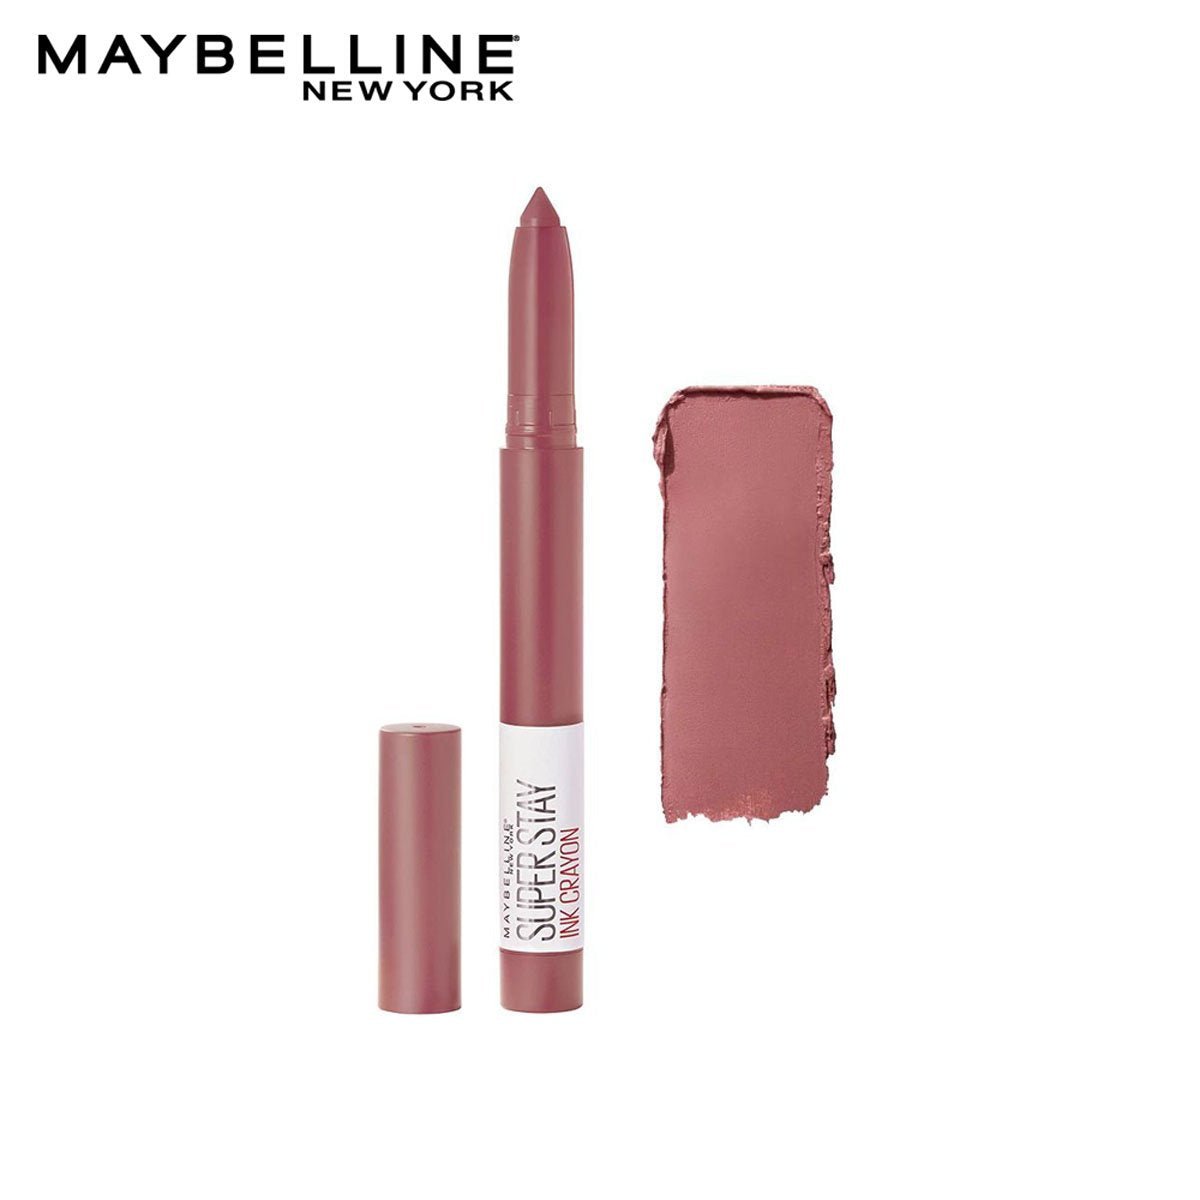 Maybelline SuperStay Ink Crayon 15 Lead The Way - AllurebeautypkMaybelline SuperStay Ink Crayon 15 Lead The Way